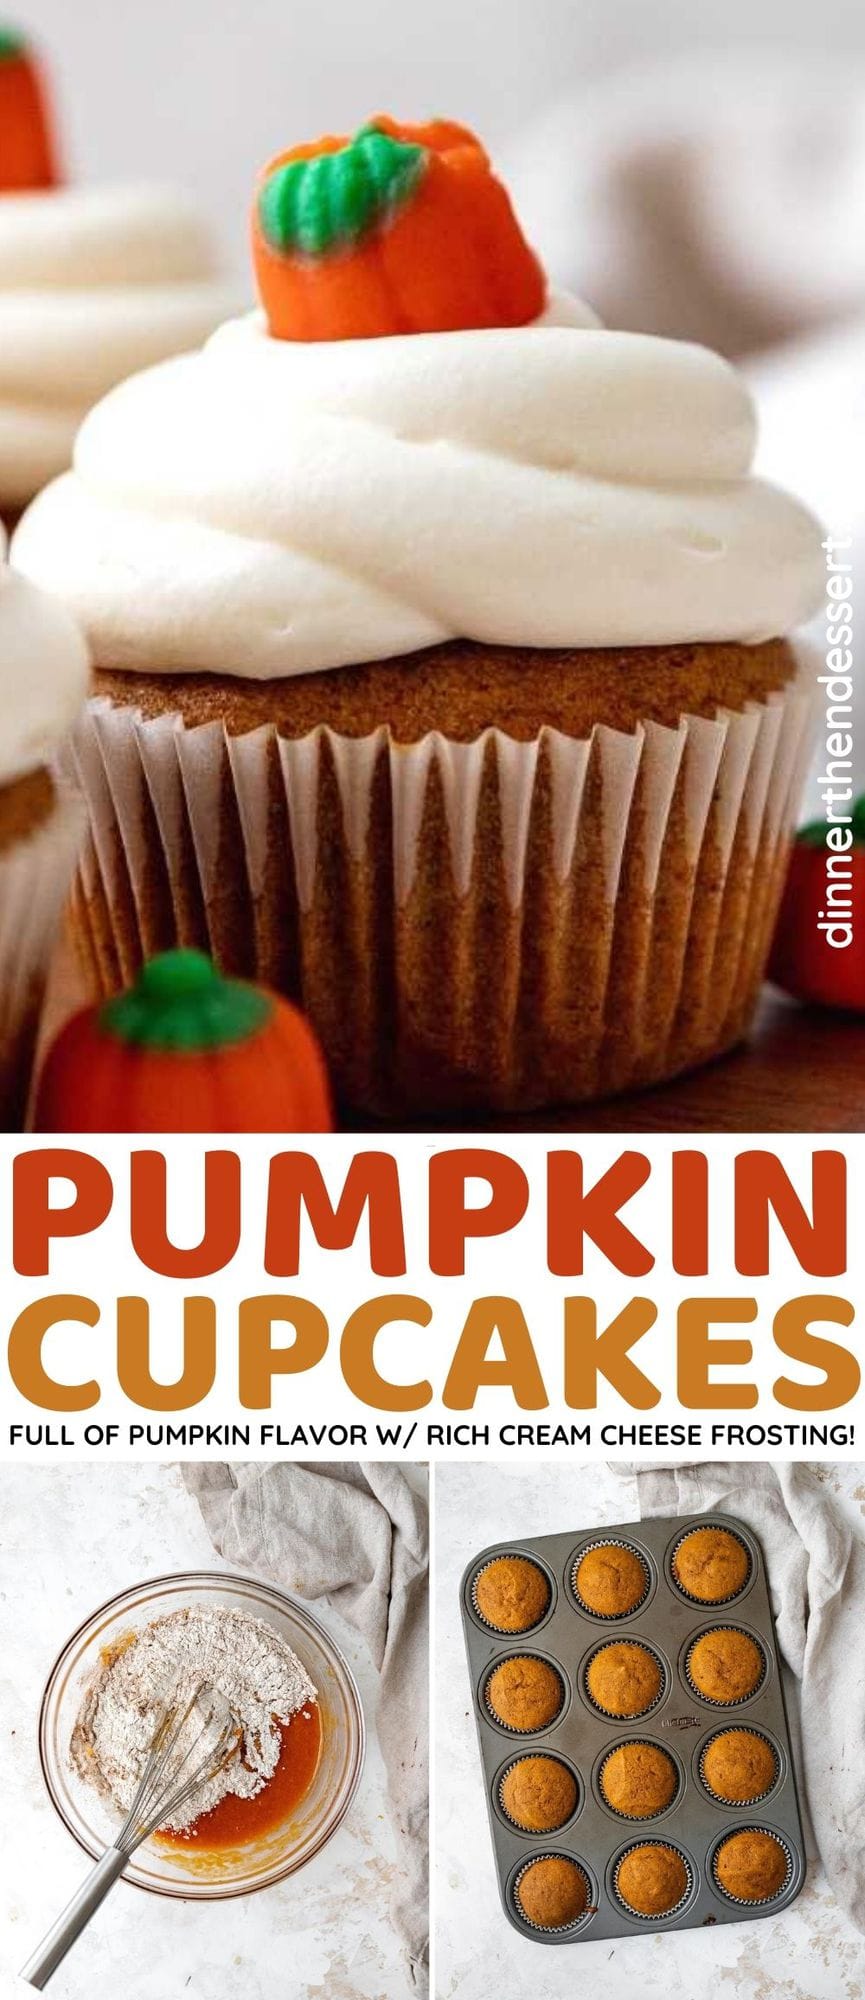 Pumpkin Cupcakes frosted with pumpkin candy on top collage